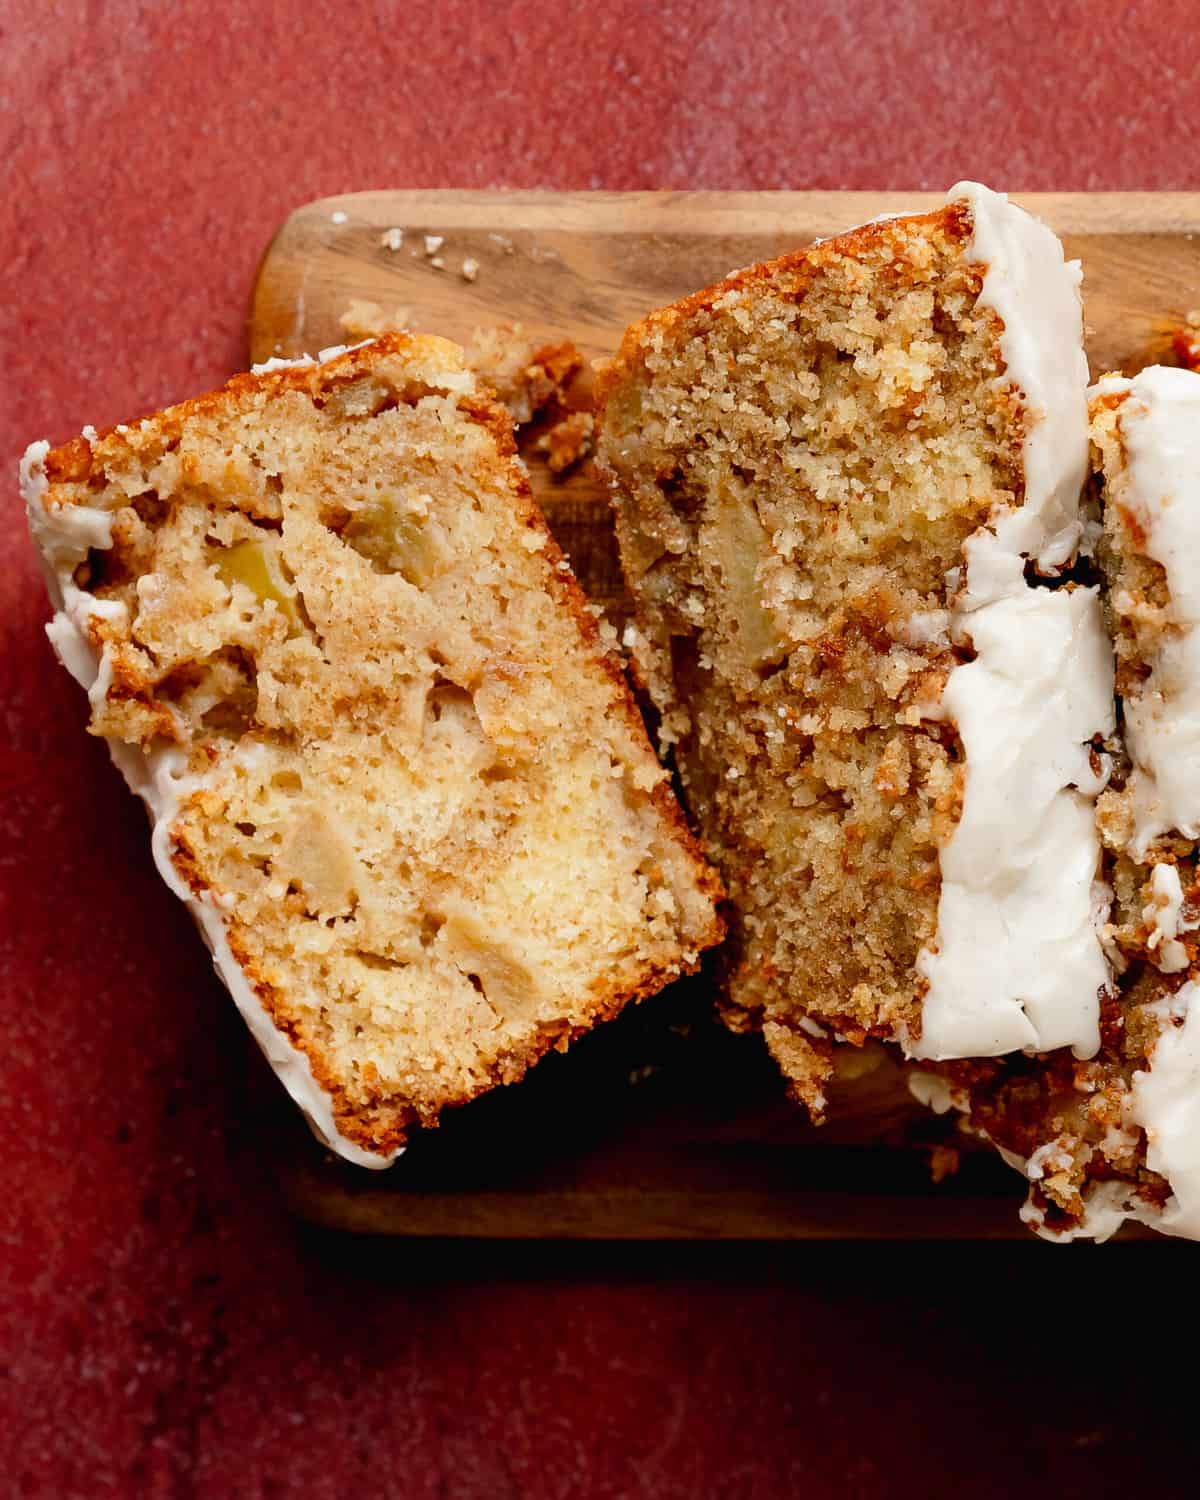 Apple fritter bread is a soft, moist and flavor packed apple quick bread with brown sugar cinnamon apples swirled throughout. The spiced apple fritter topping is also swirled on the apple bread giving you cozy, caramelized apple chunks in every bite. Make this Amish apple bread truly decadent by topping it with an easy vanilla bean glaze. 